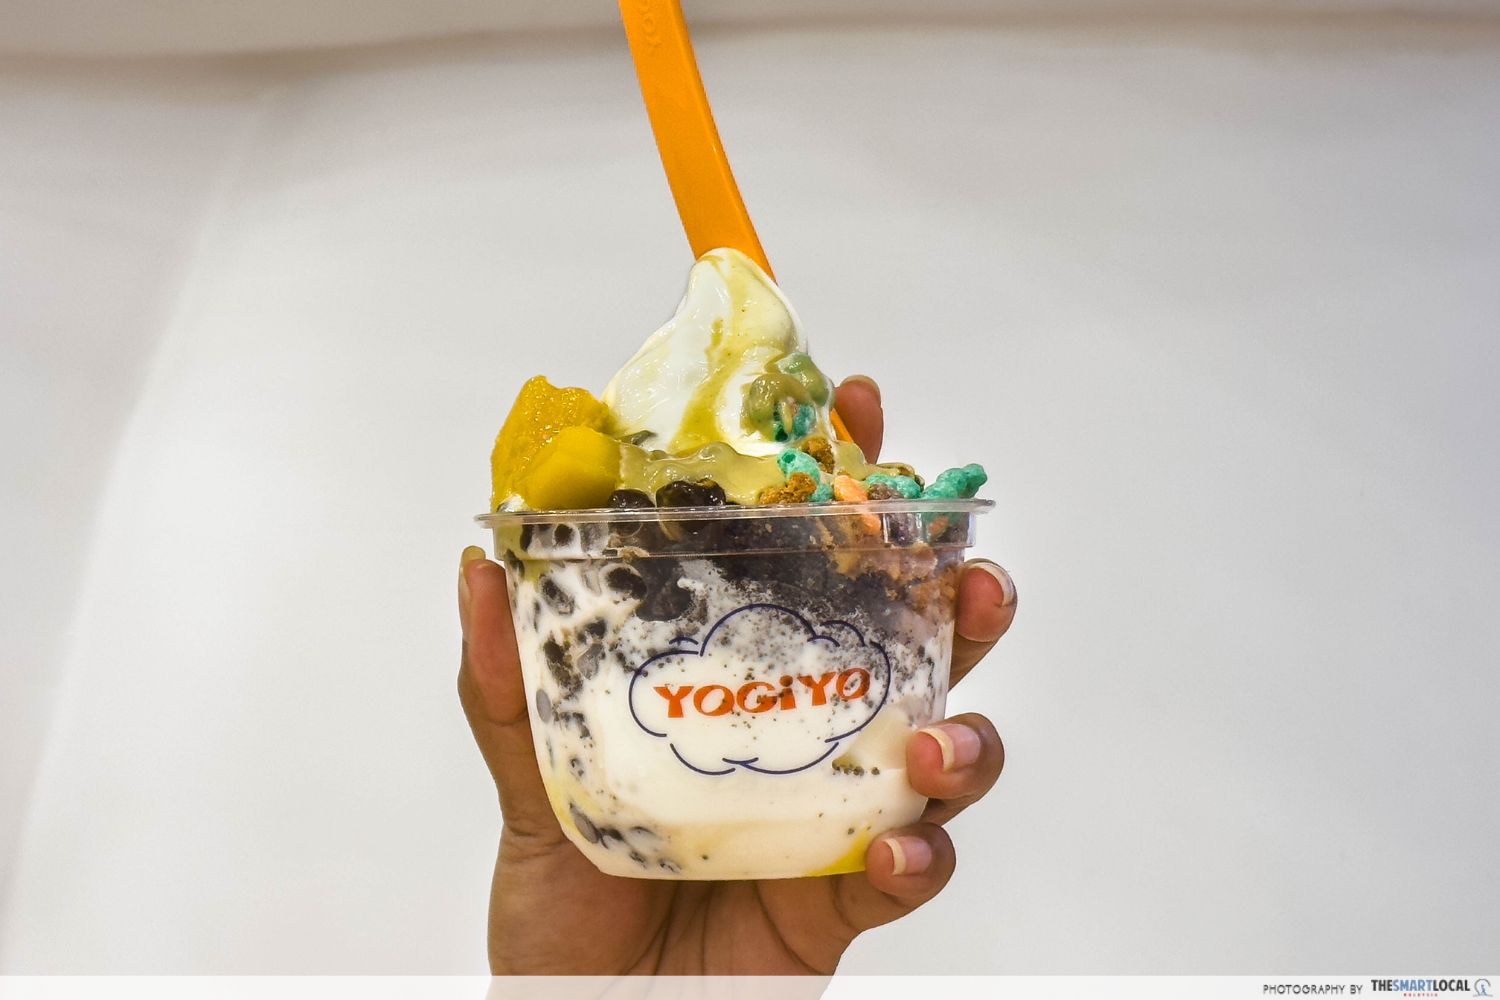 a hand holding a medium cup of froyo by yogiyo, it is topped with colourful cereals, chocolate chips, fruits, and pistachio sauce